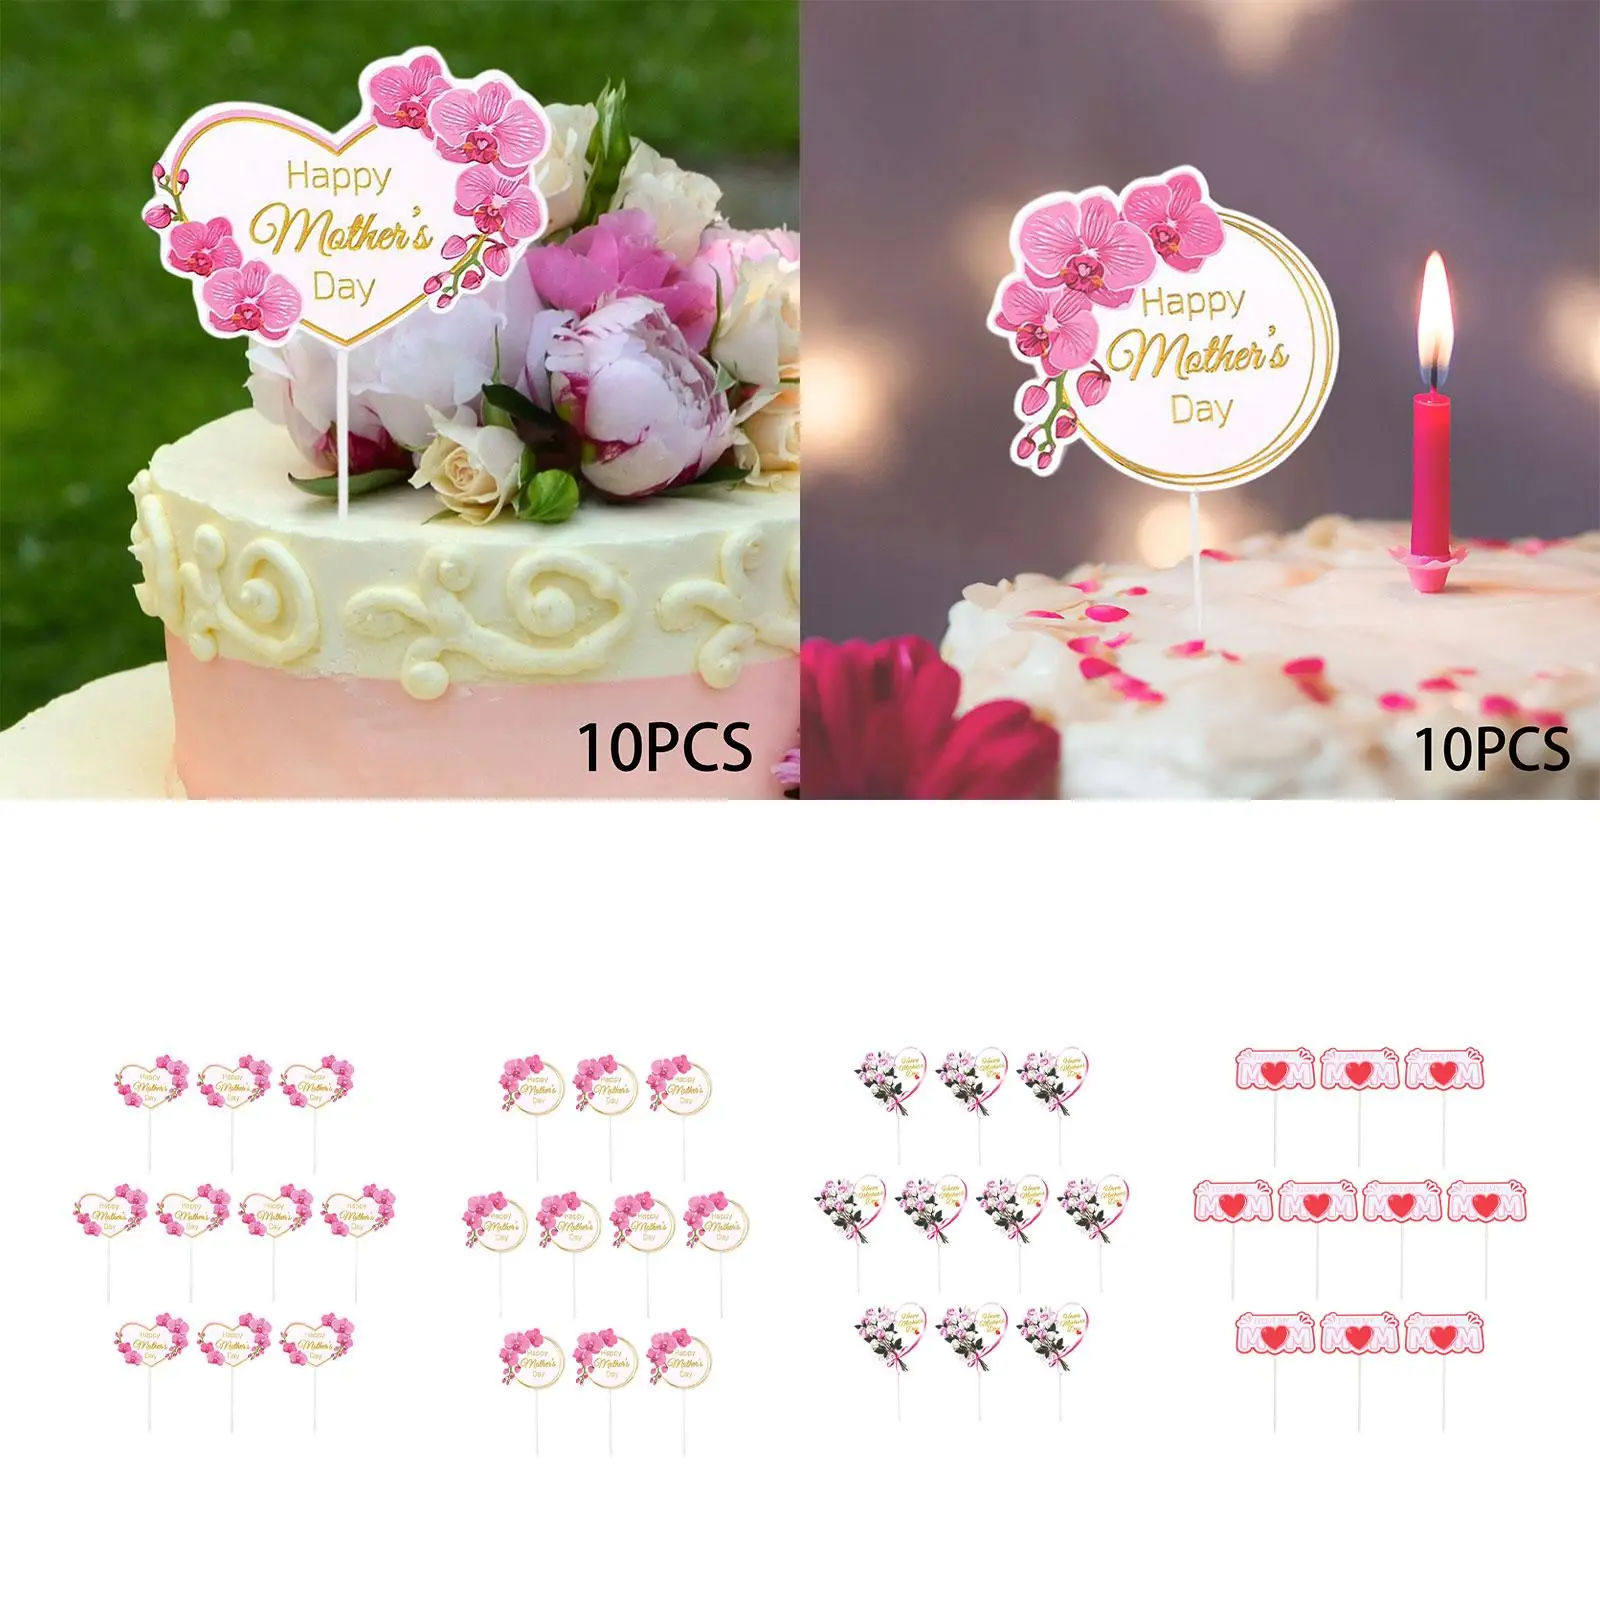 10x Cake Insert Cake Decoration Decorative cake Toppers for Event Cake